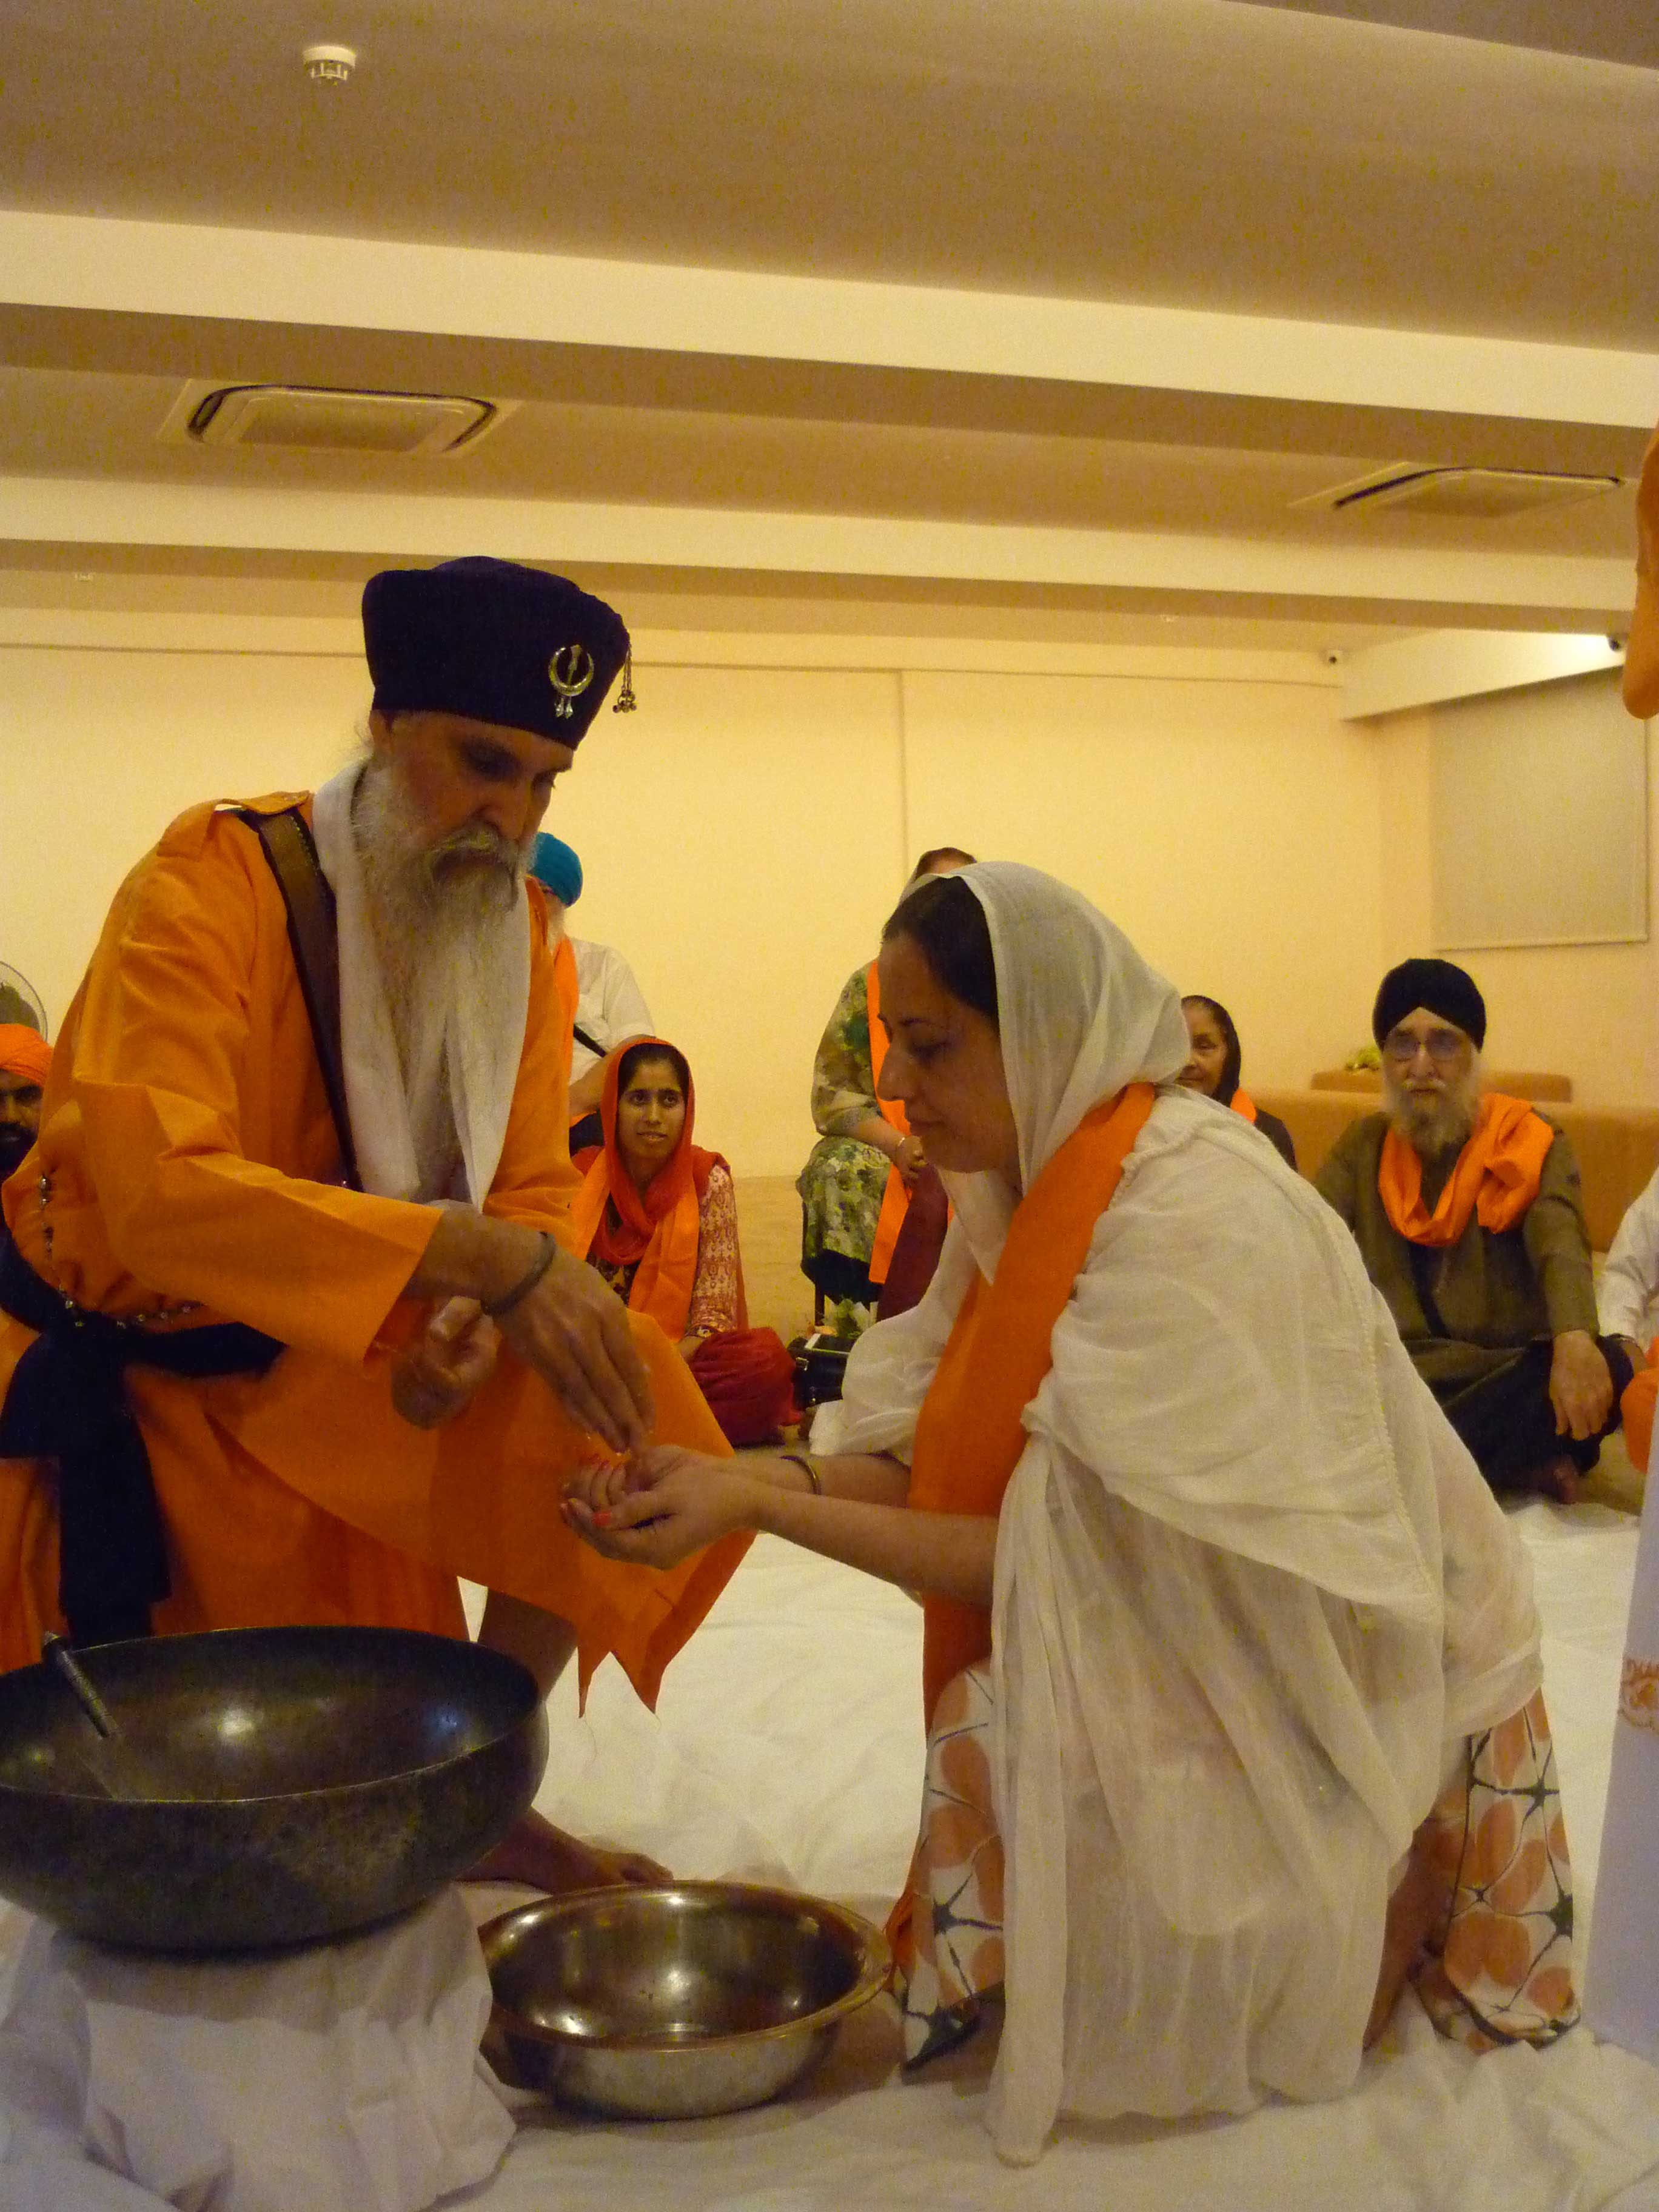 A devotee receiving the <i>amrit</i> (baptismal water) during the <i>Amrit Sanchar </i>ceremony.